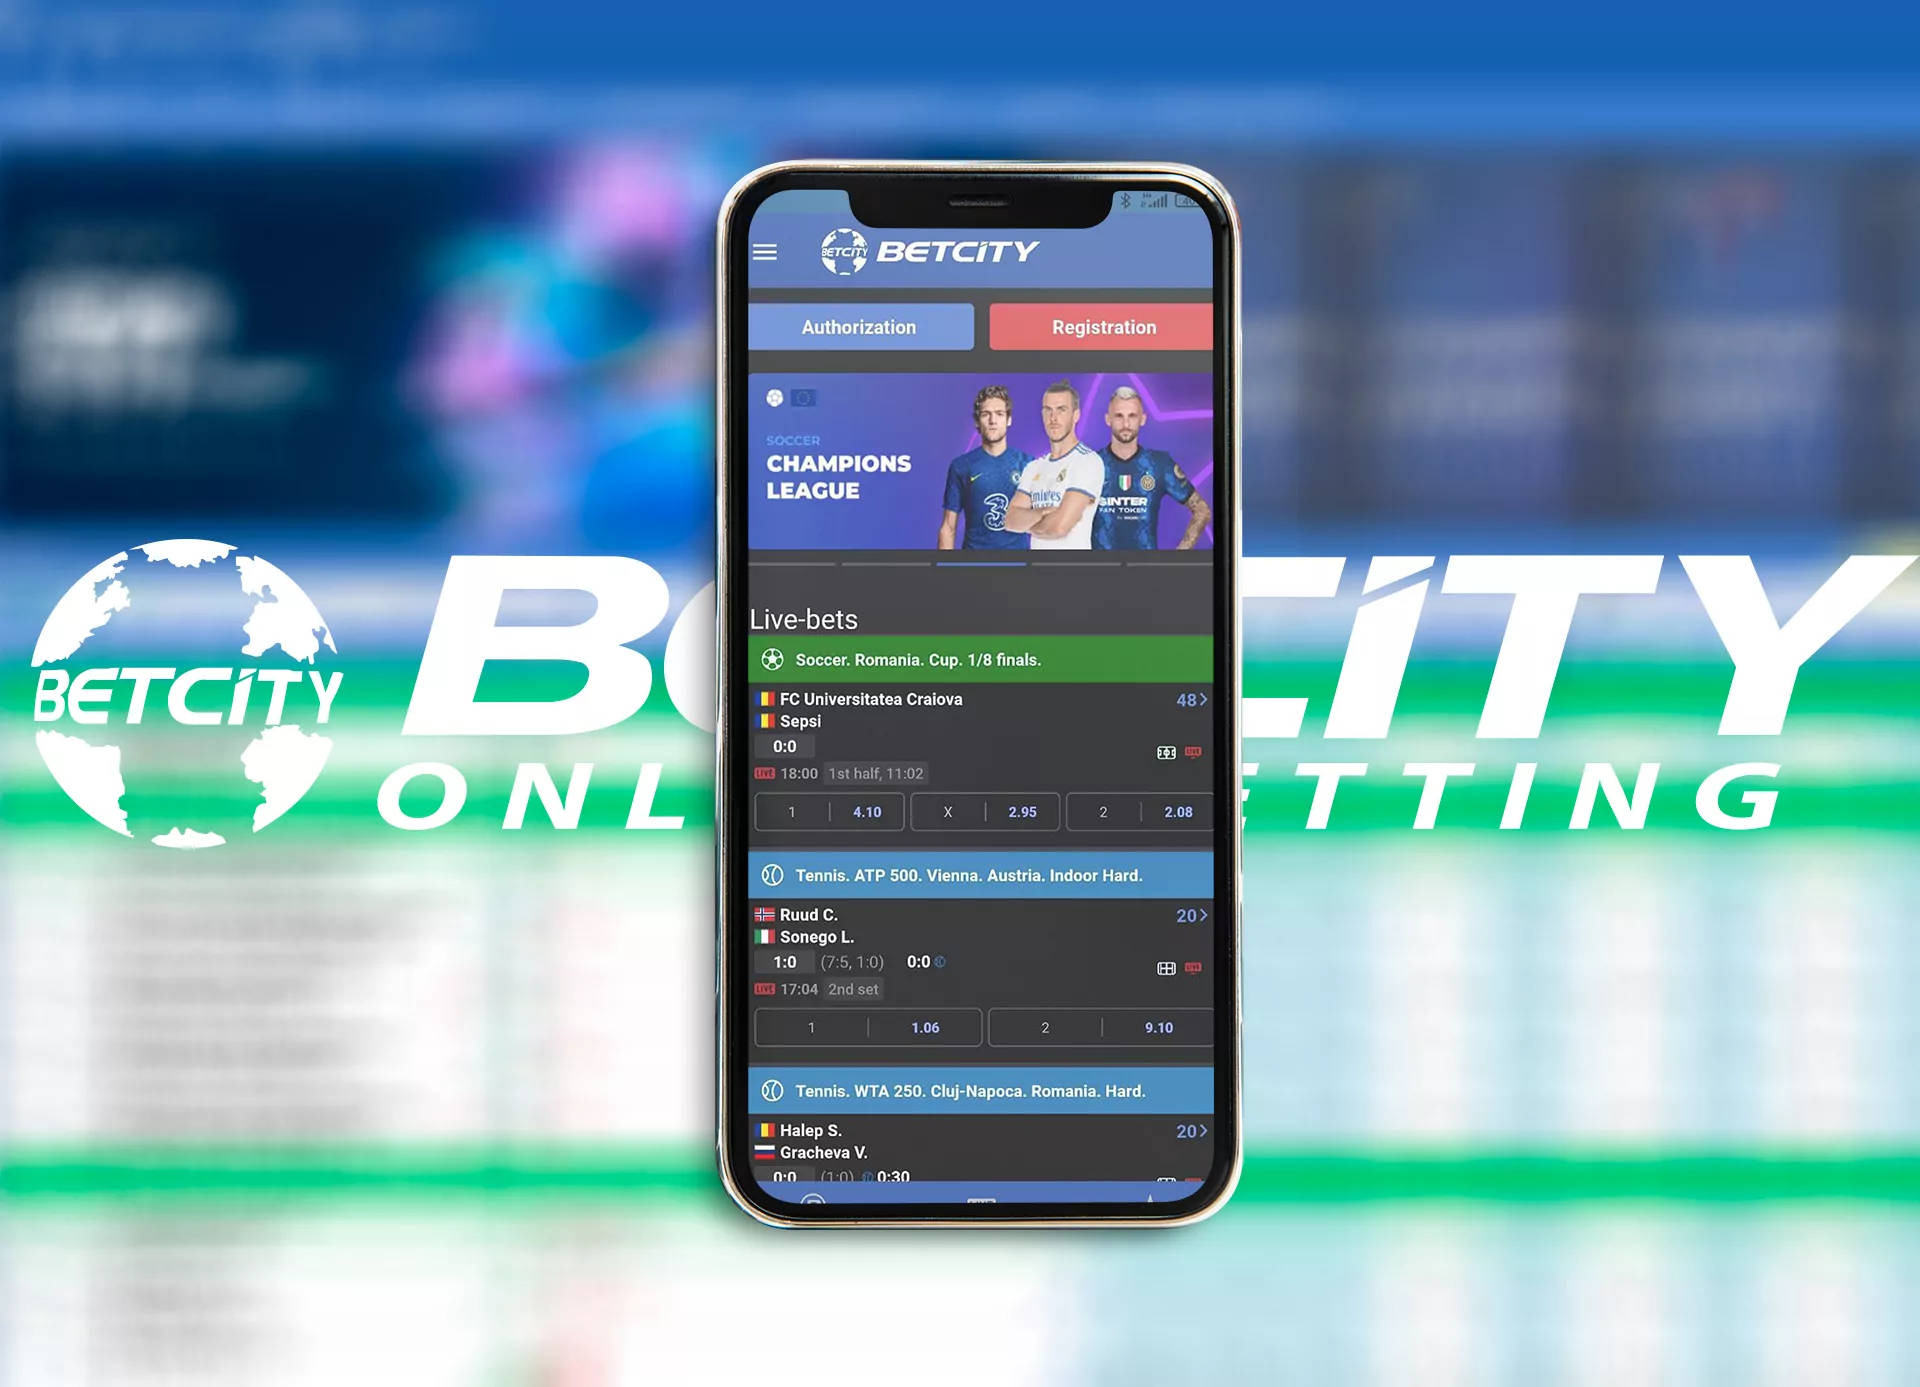 Download the Betcity app and get your bonus for betting.